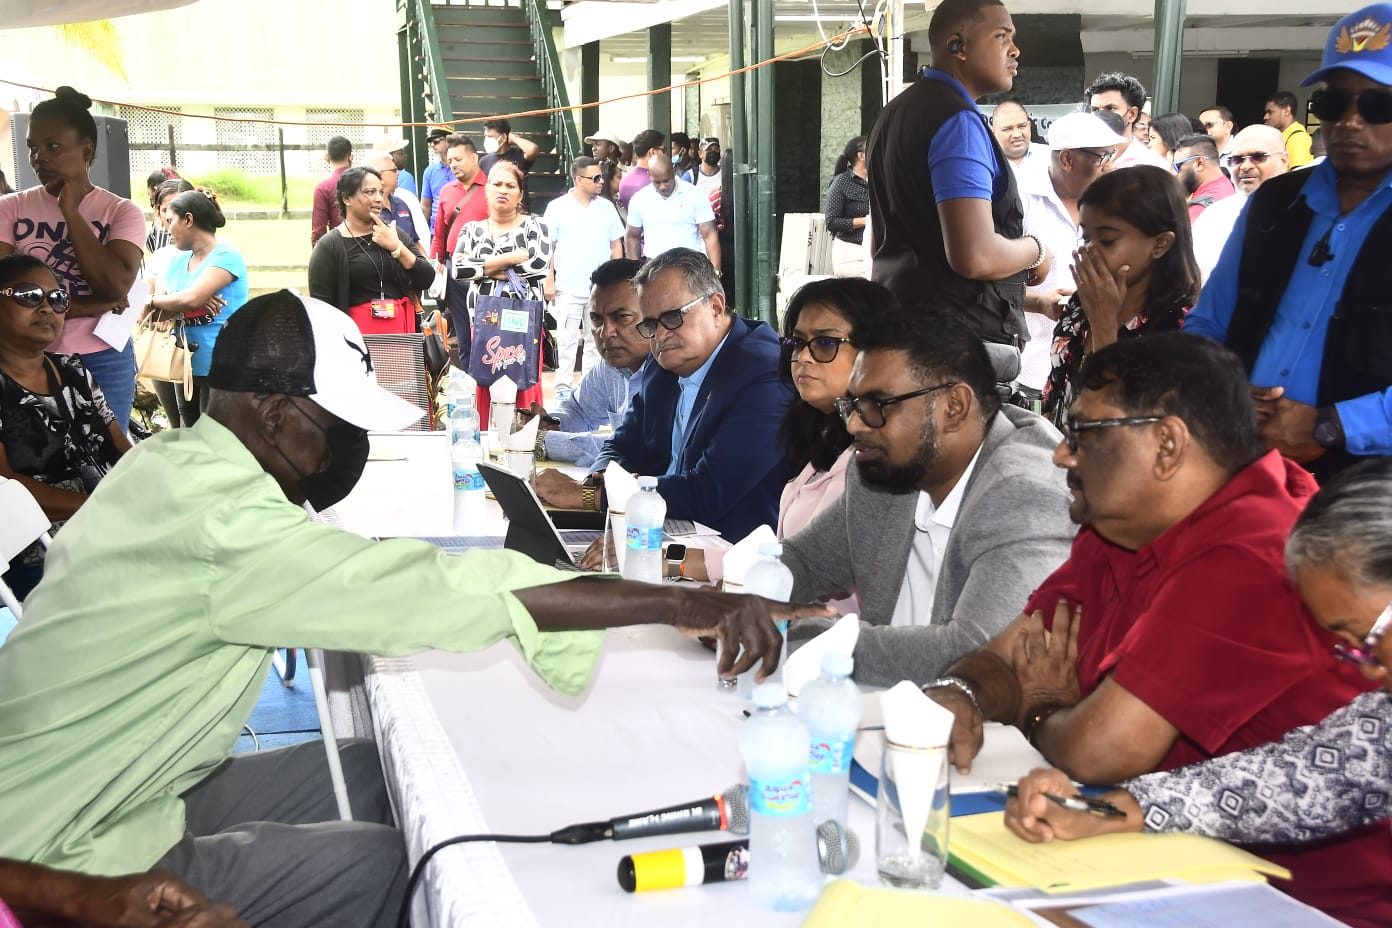 A residents engages President Ali who is flanked by senior government officials (Adrian Narine photo)